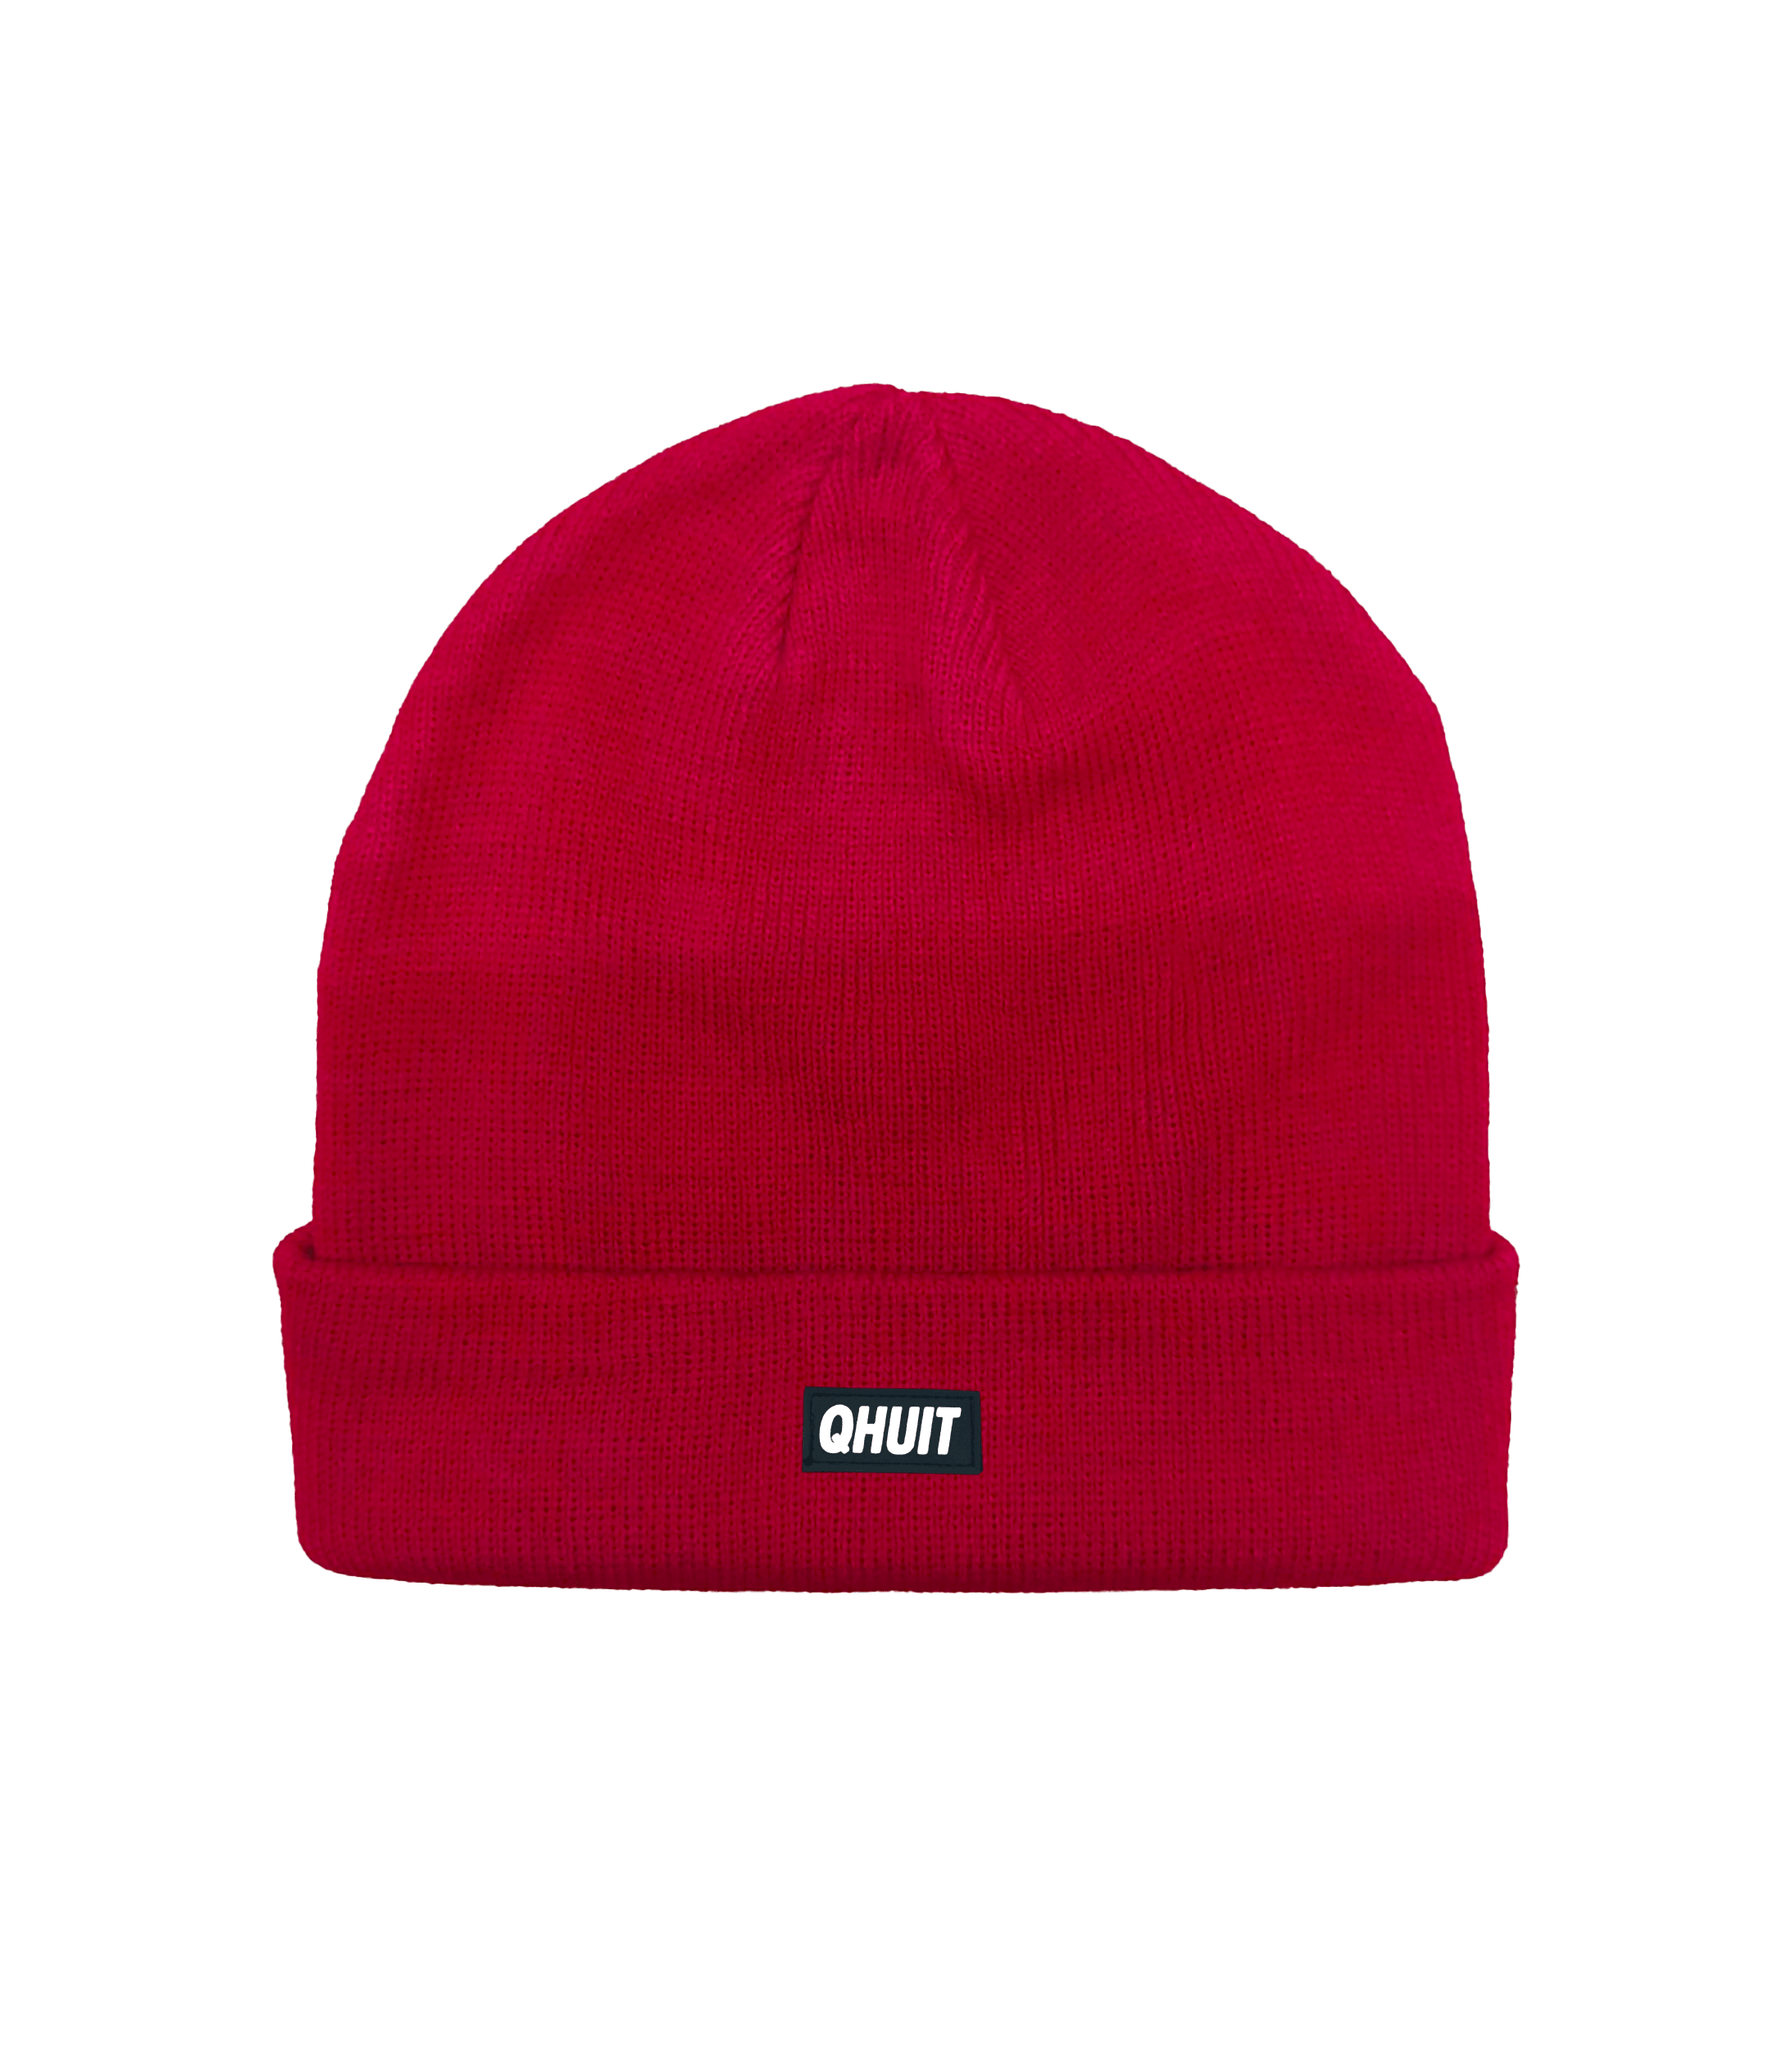 QHUIT, Beanie red